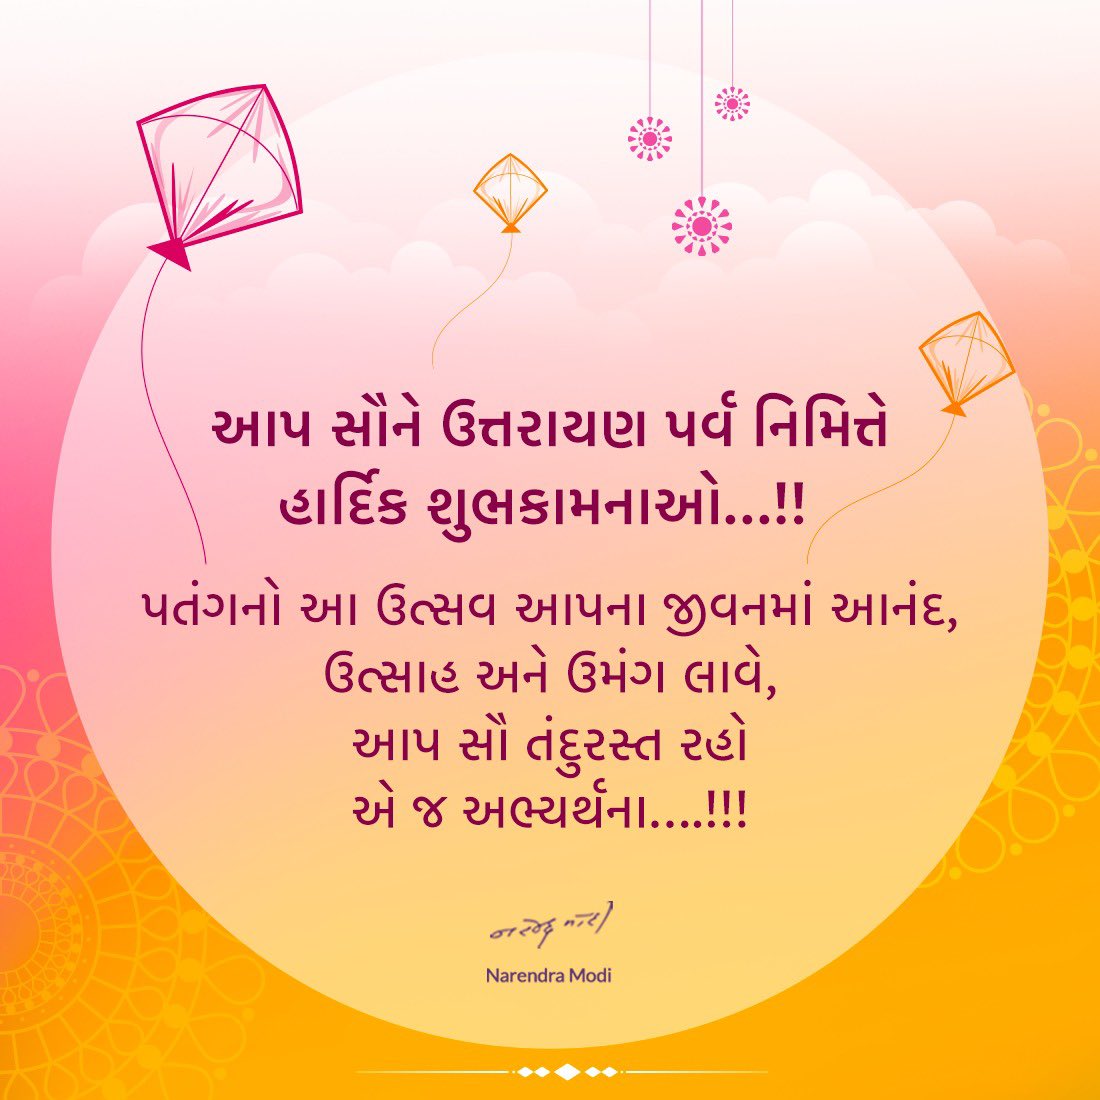 Greetings on Uttarayan. May there be abundance of joy in our lives.